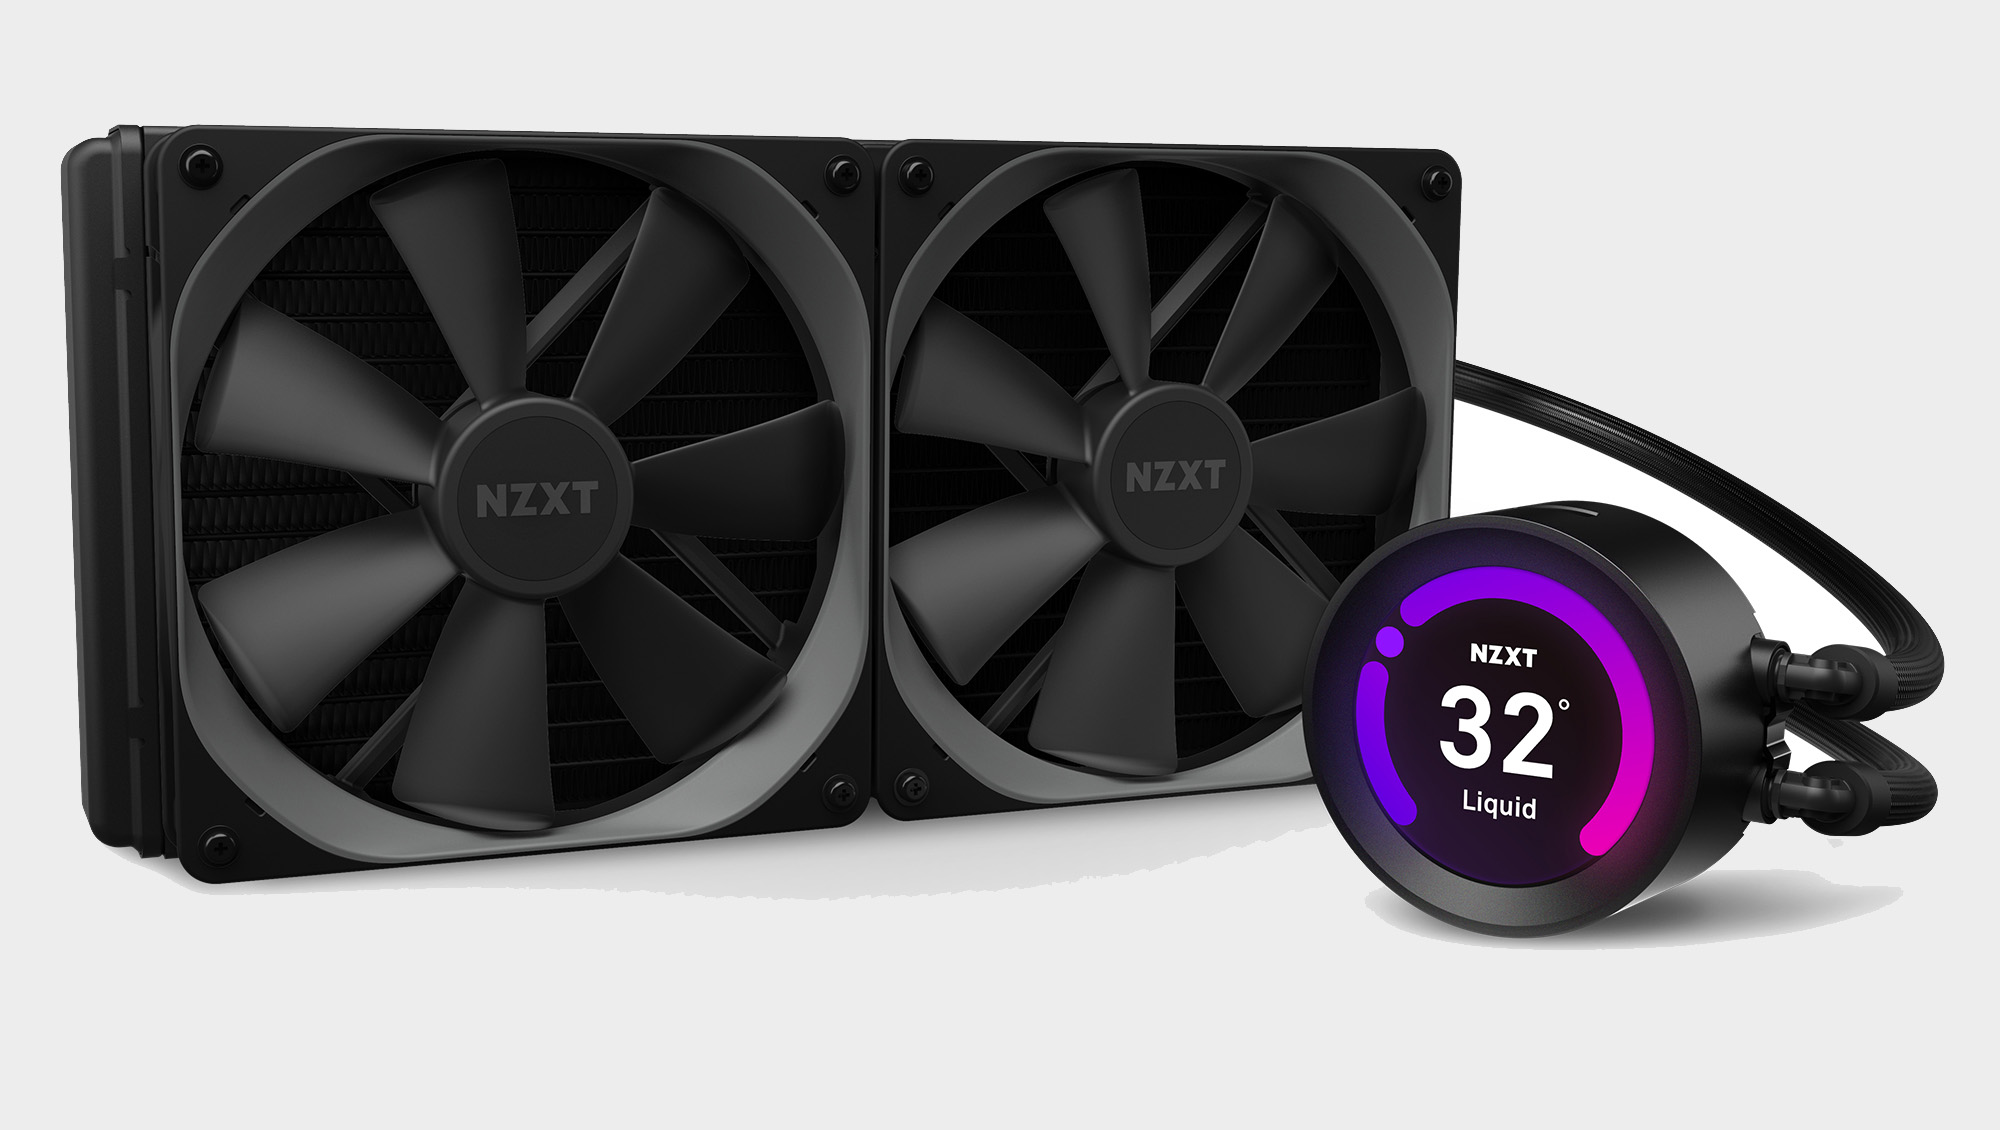 Nzxt Put A Lcd Screen In Its Coolers And You Can Customize The Image Pc Gamer